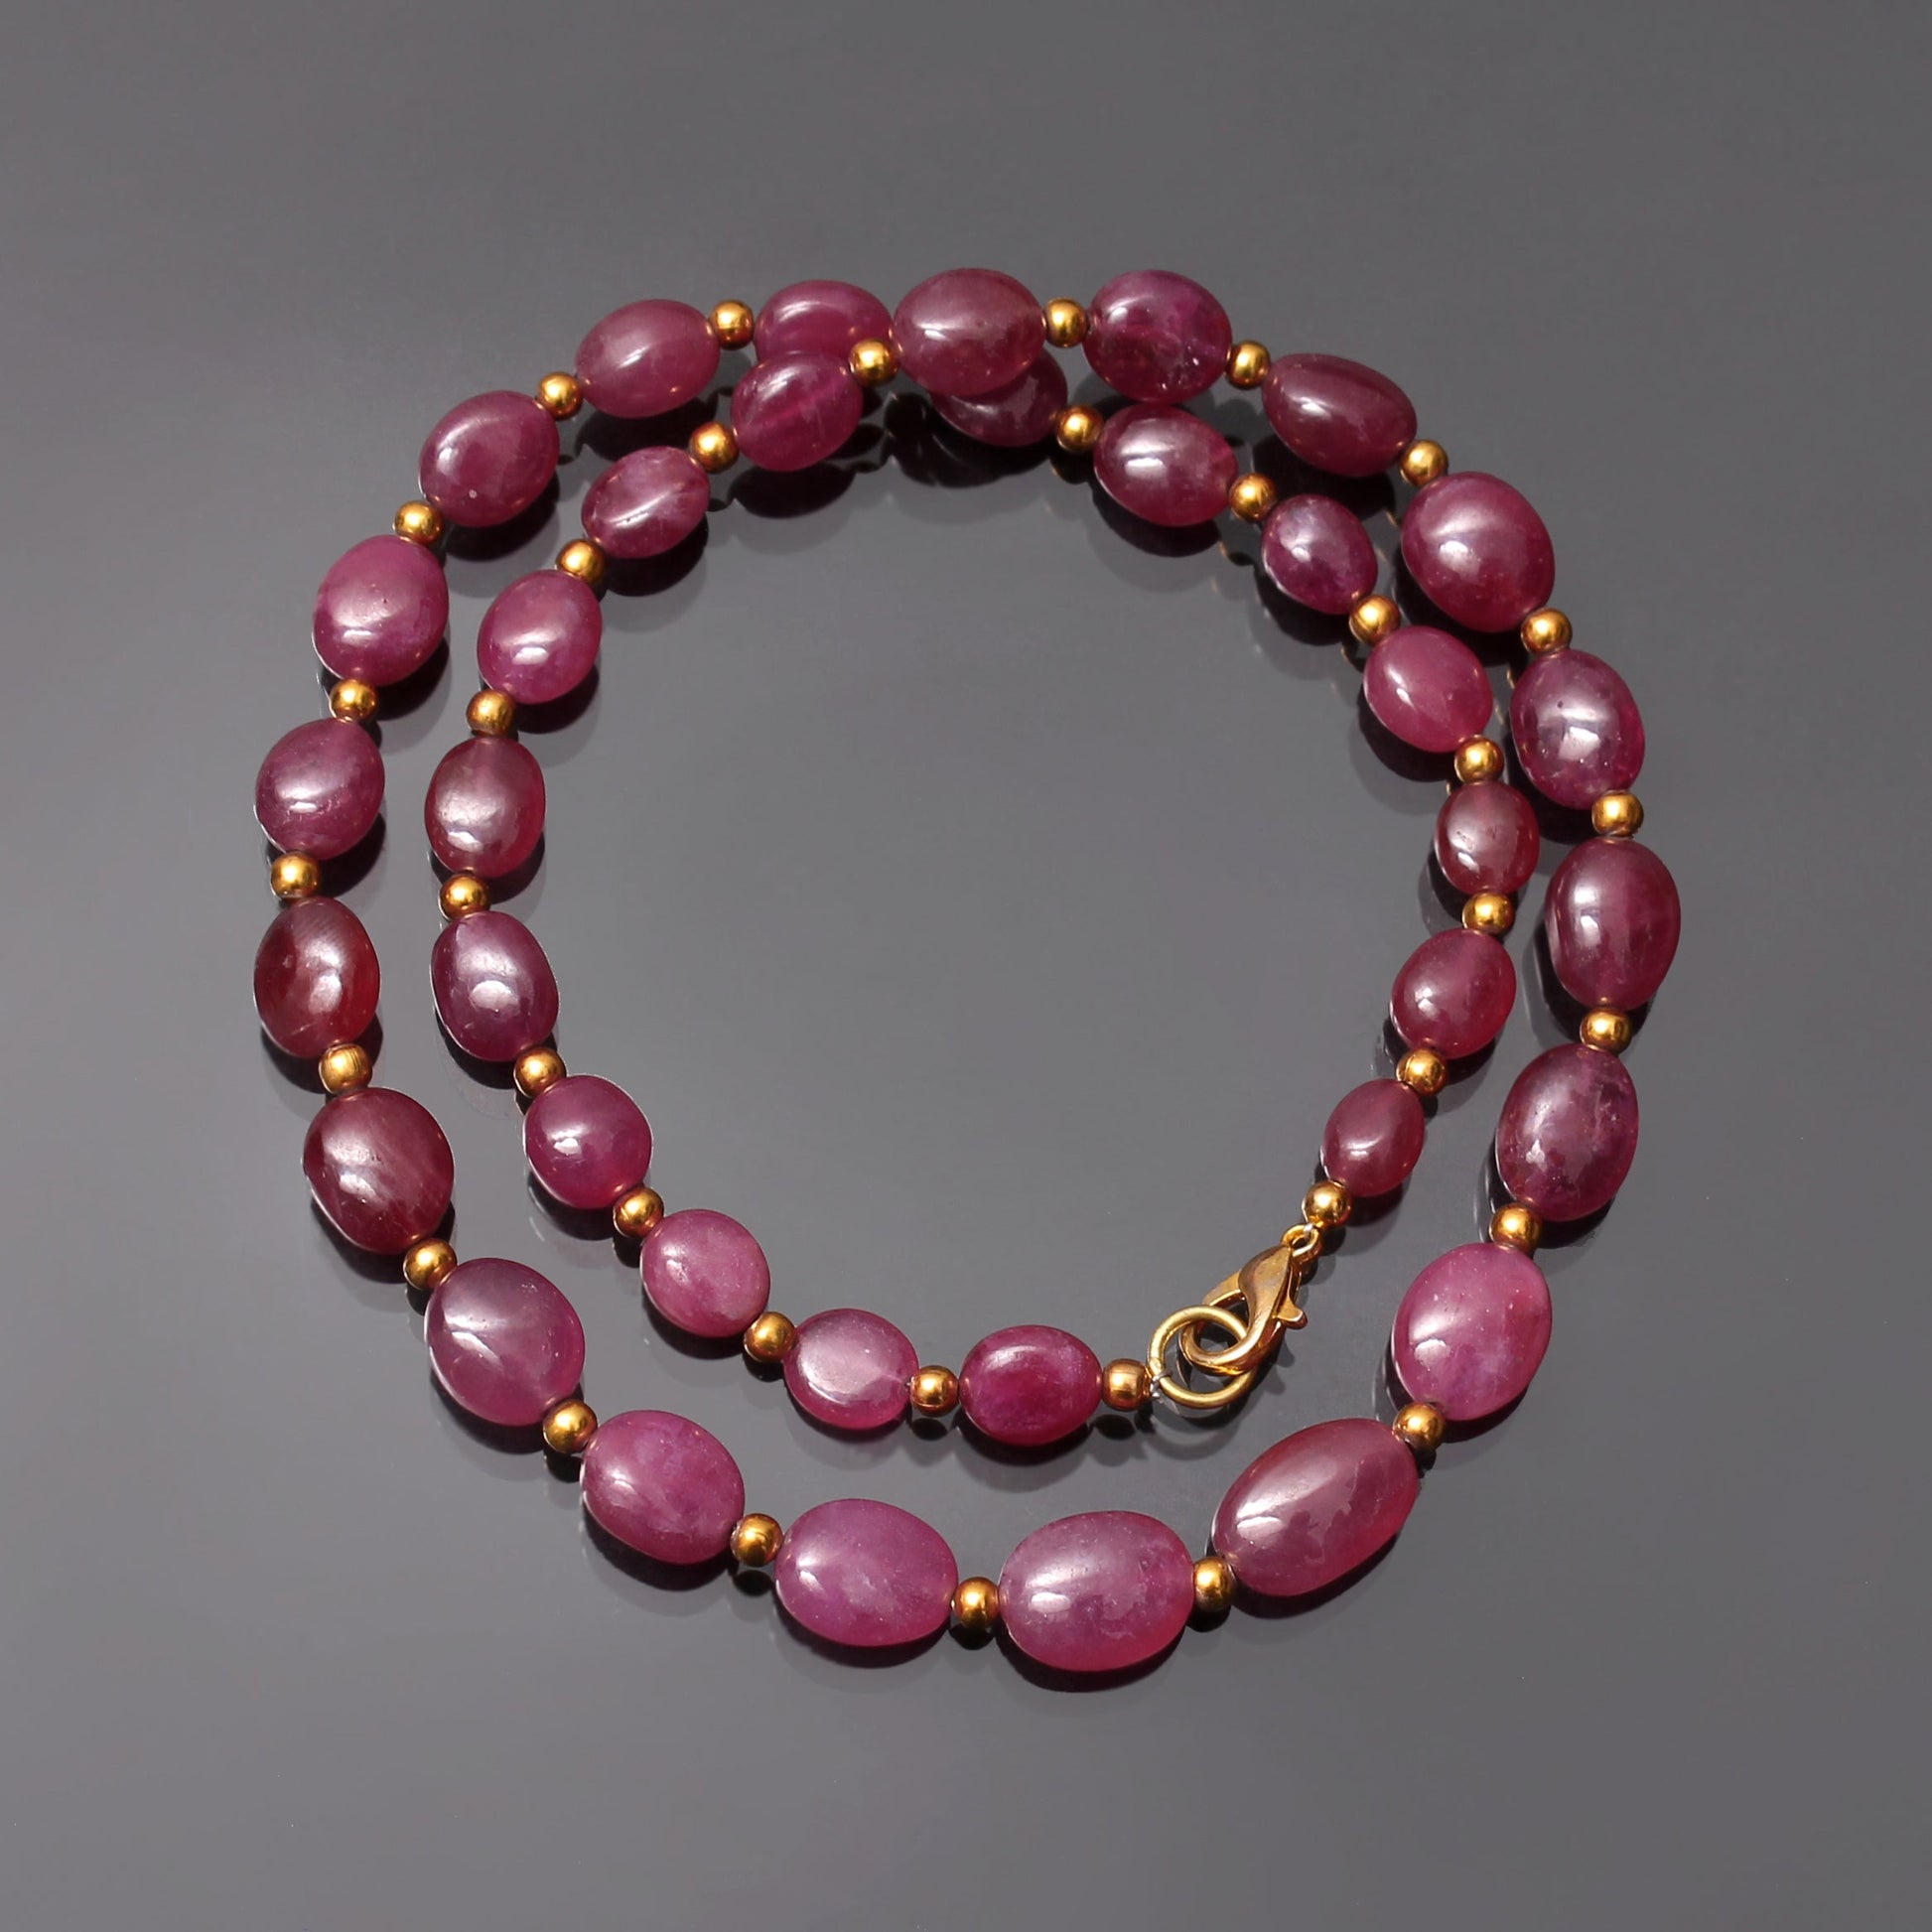 Red Ruby precious Stone Beaded Silver Necklace GemsRush